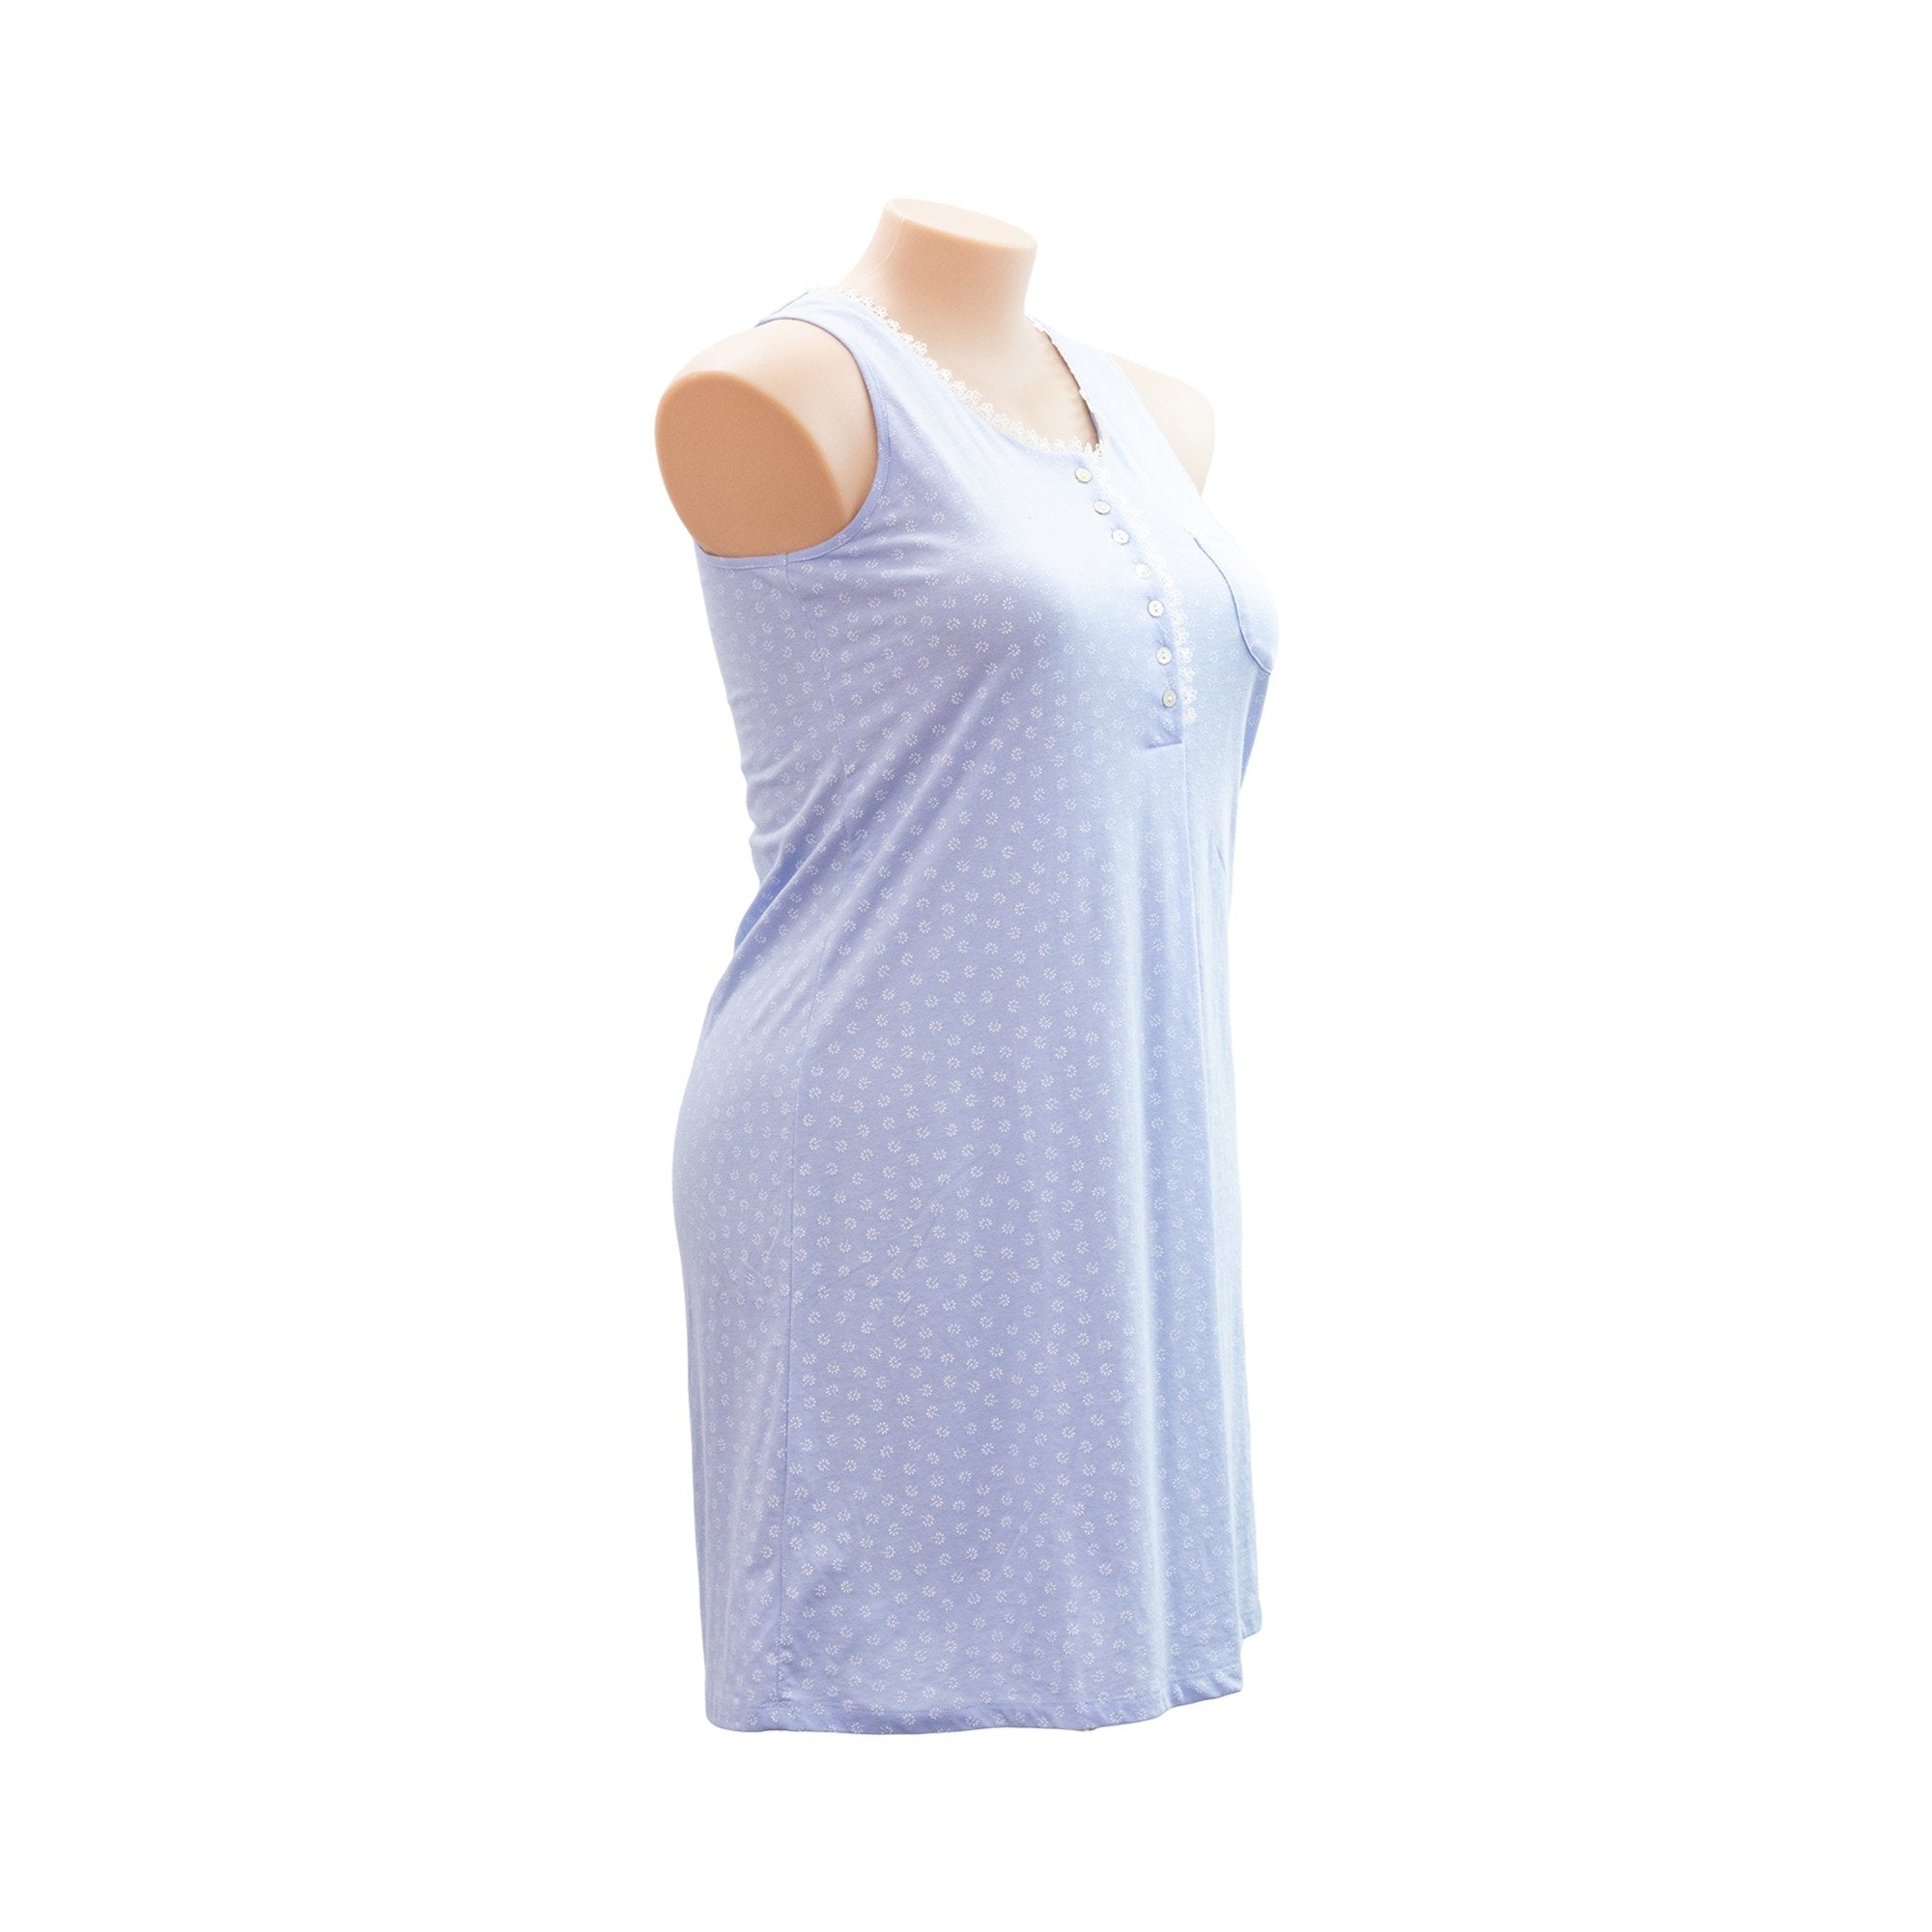 Givoni Daffodil Sleeveless SK144 - Nighties Wedgewood / 10  Available at Illusions Lingerie